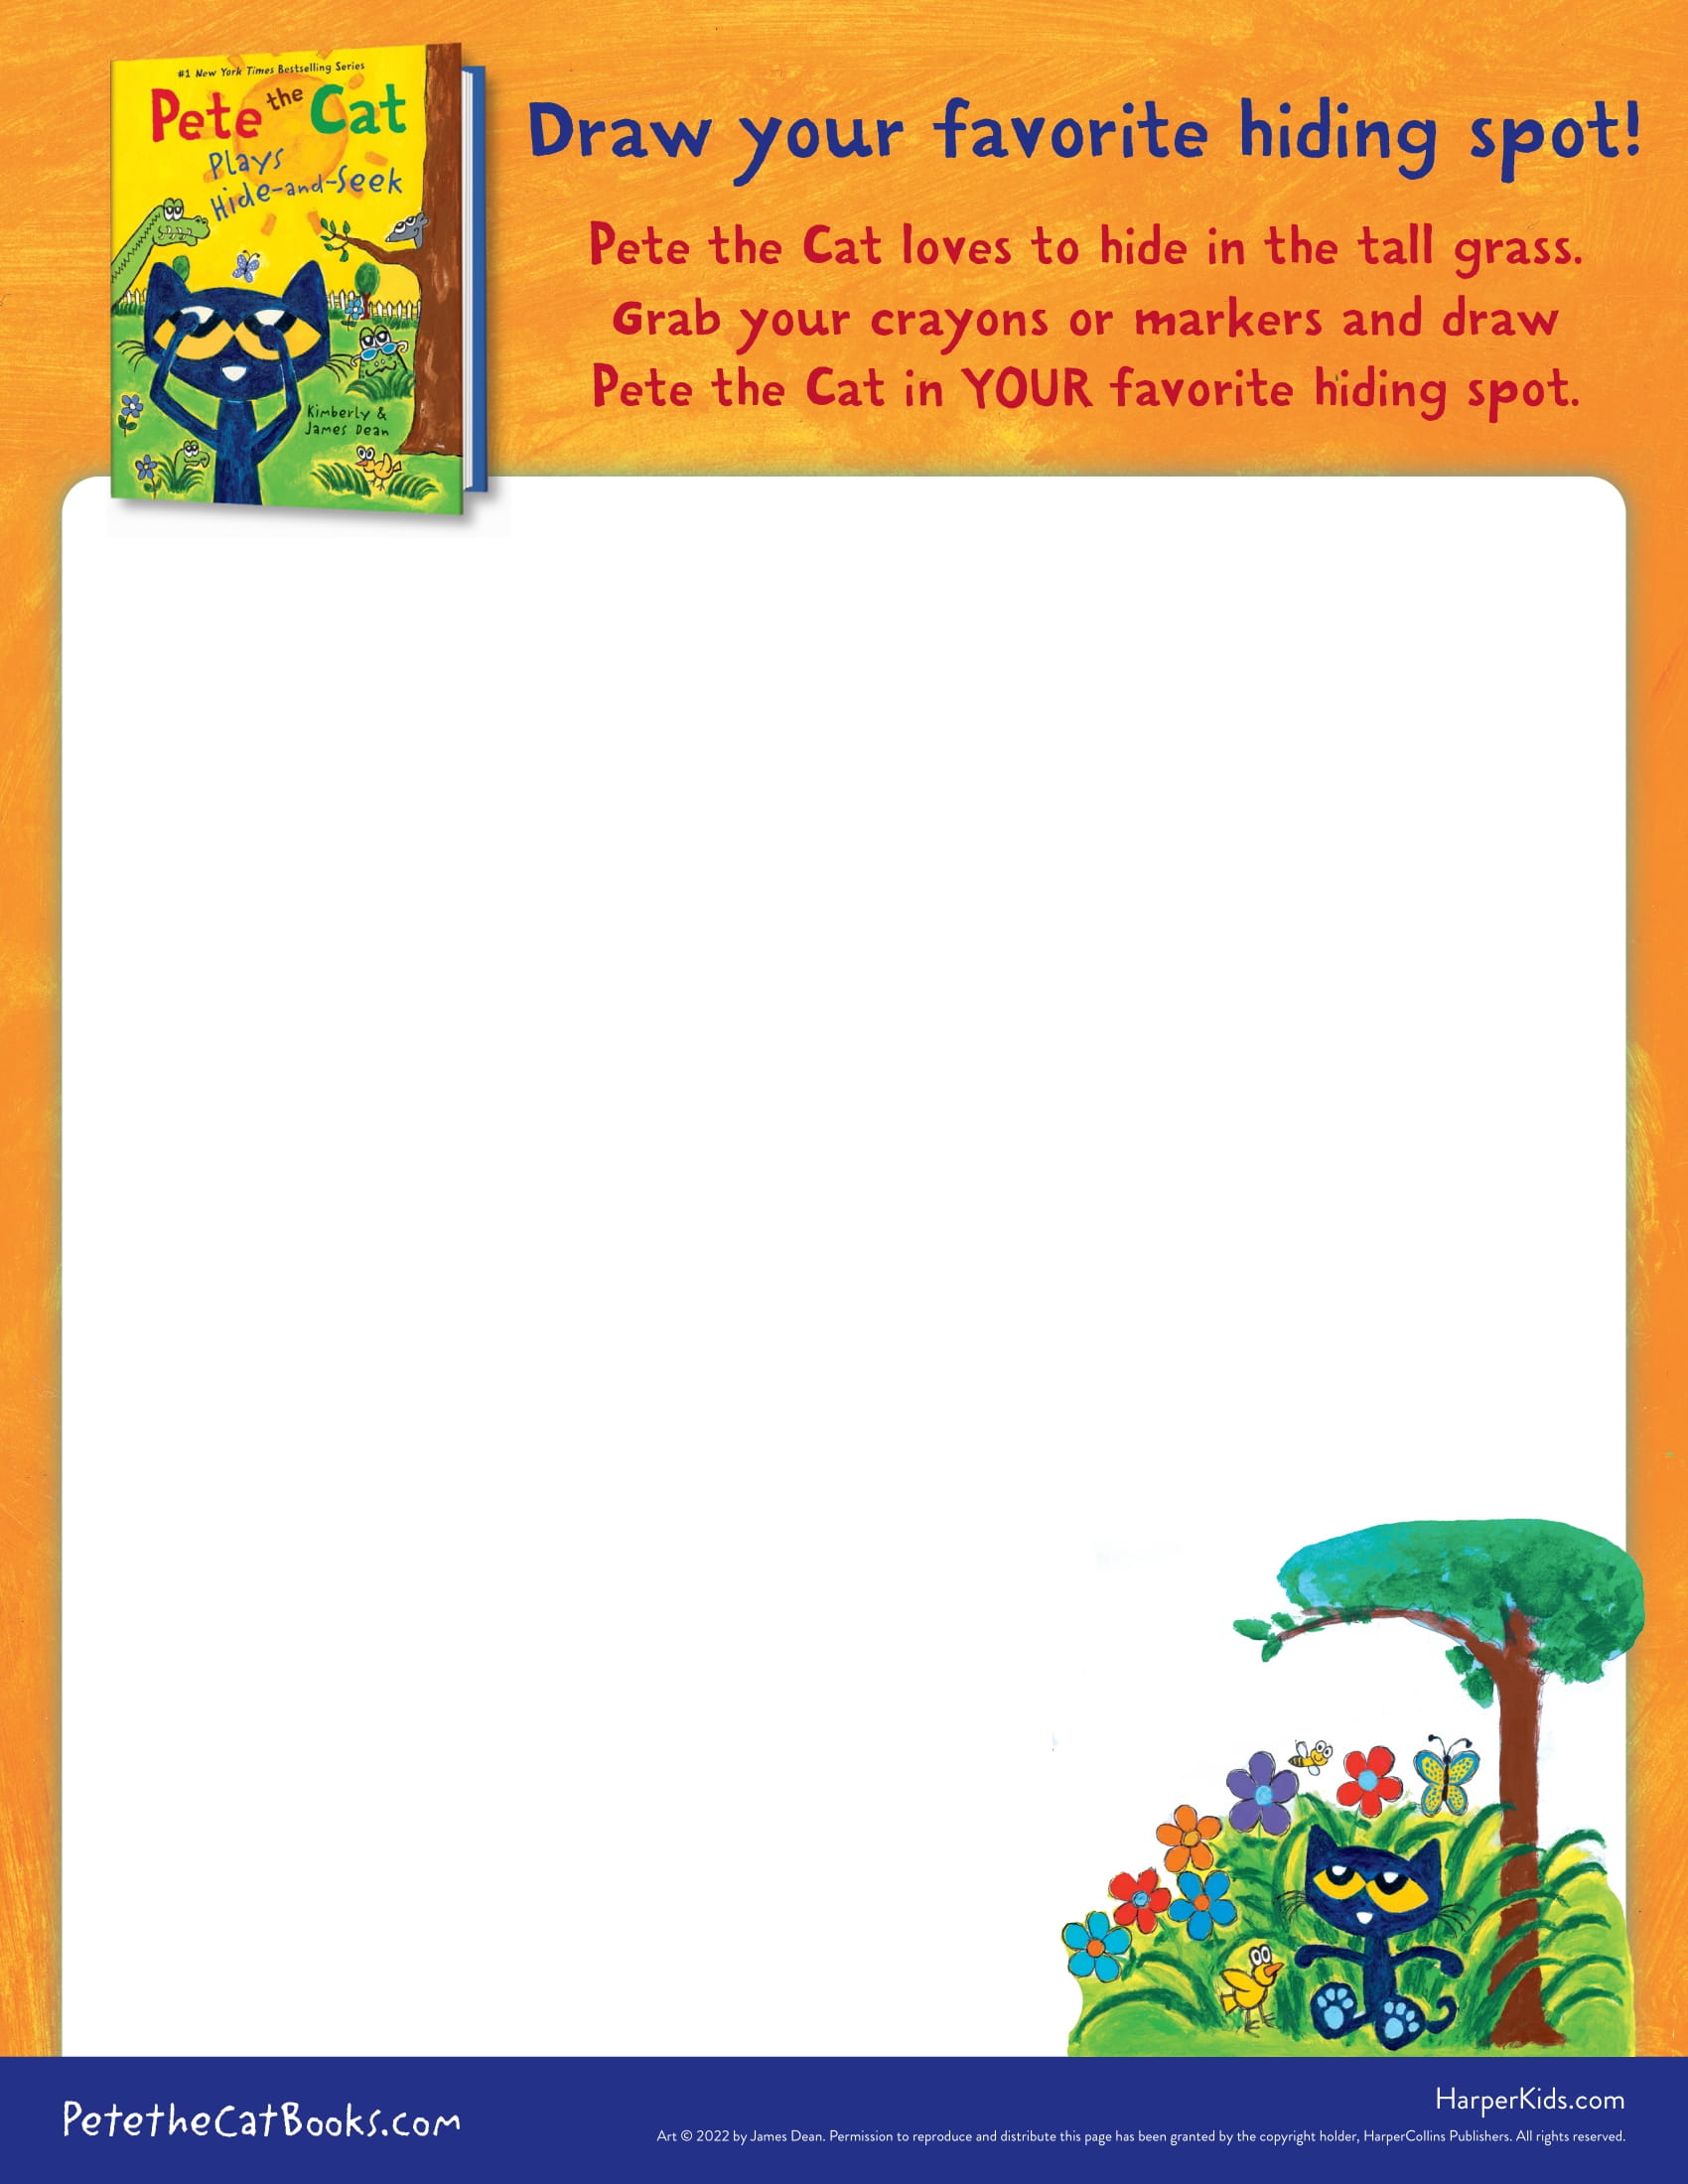 Pete the Cat Plays Hide-and-Seek by Kimberly and James Dean (Hardcover)